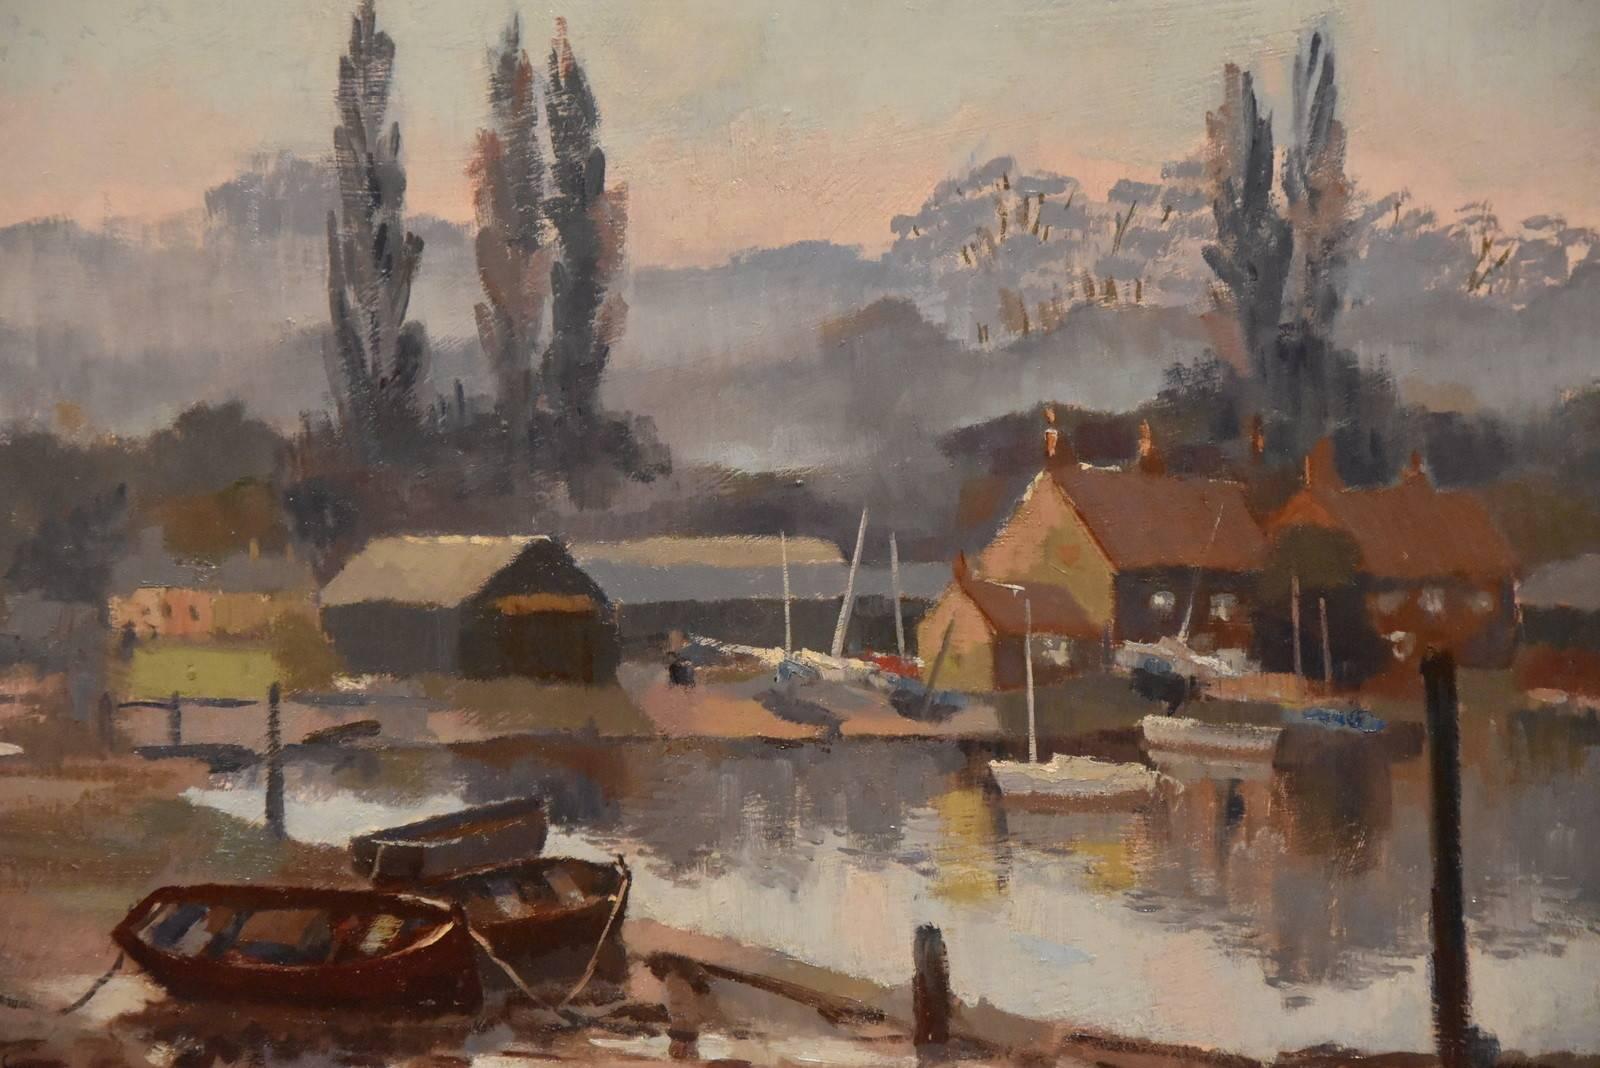 "A Devon Harbour" by Charles Smith. Charles Smith F.R.S.A, born 1913 was a maritime painter who studied at Camberwell School of Art, member of Wapping group, London Sketching club etc. Oil on board. Signed and dated 1976. 

Dimensions